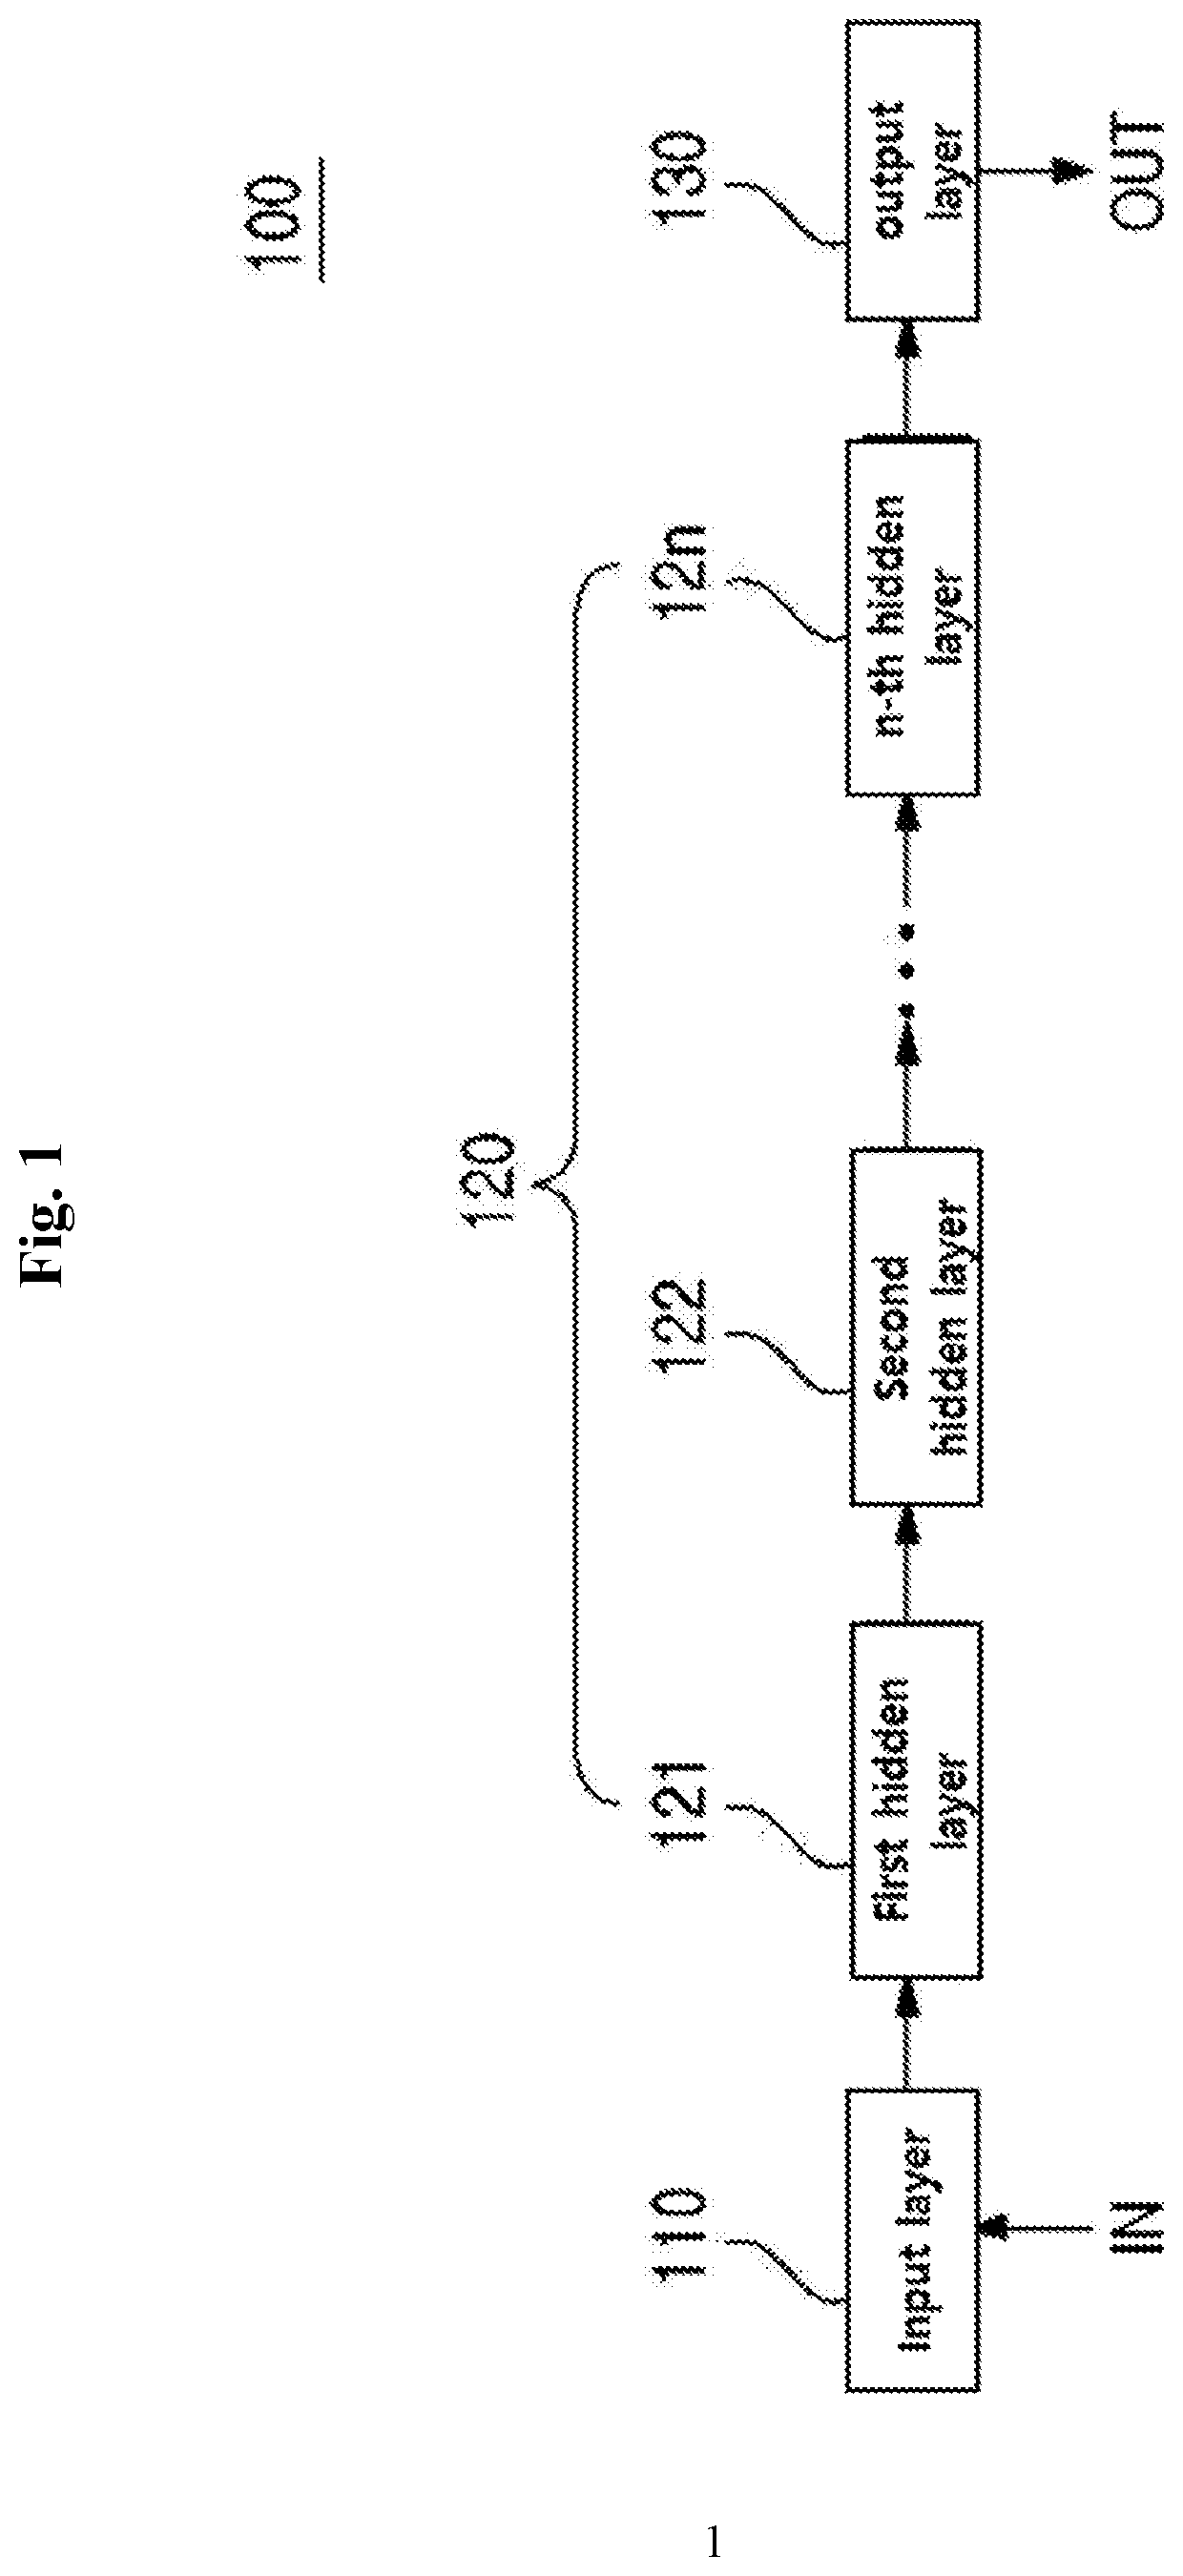 Artificial neural network system using a piecewise linear rectifier unit for compensating component defects